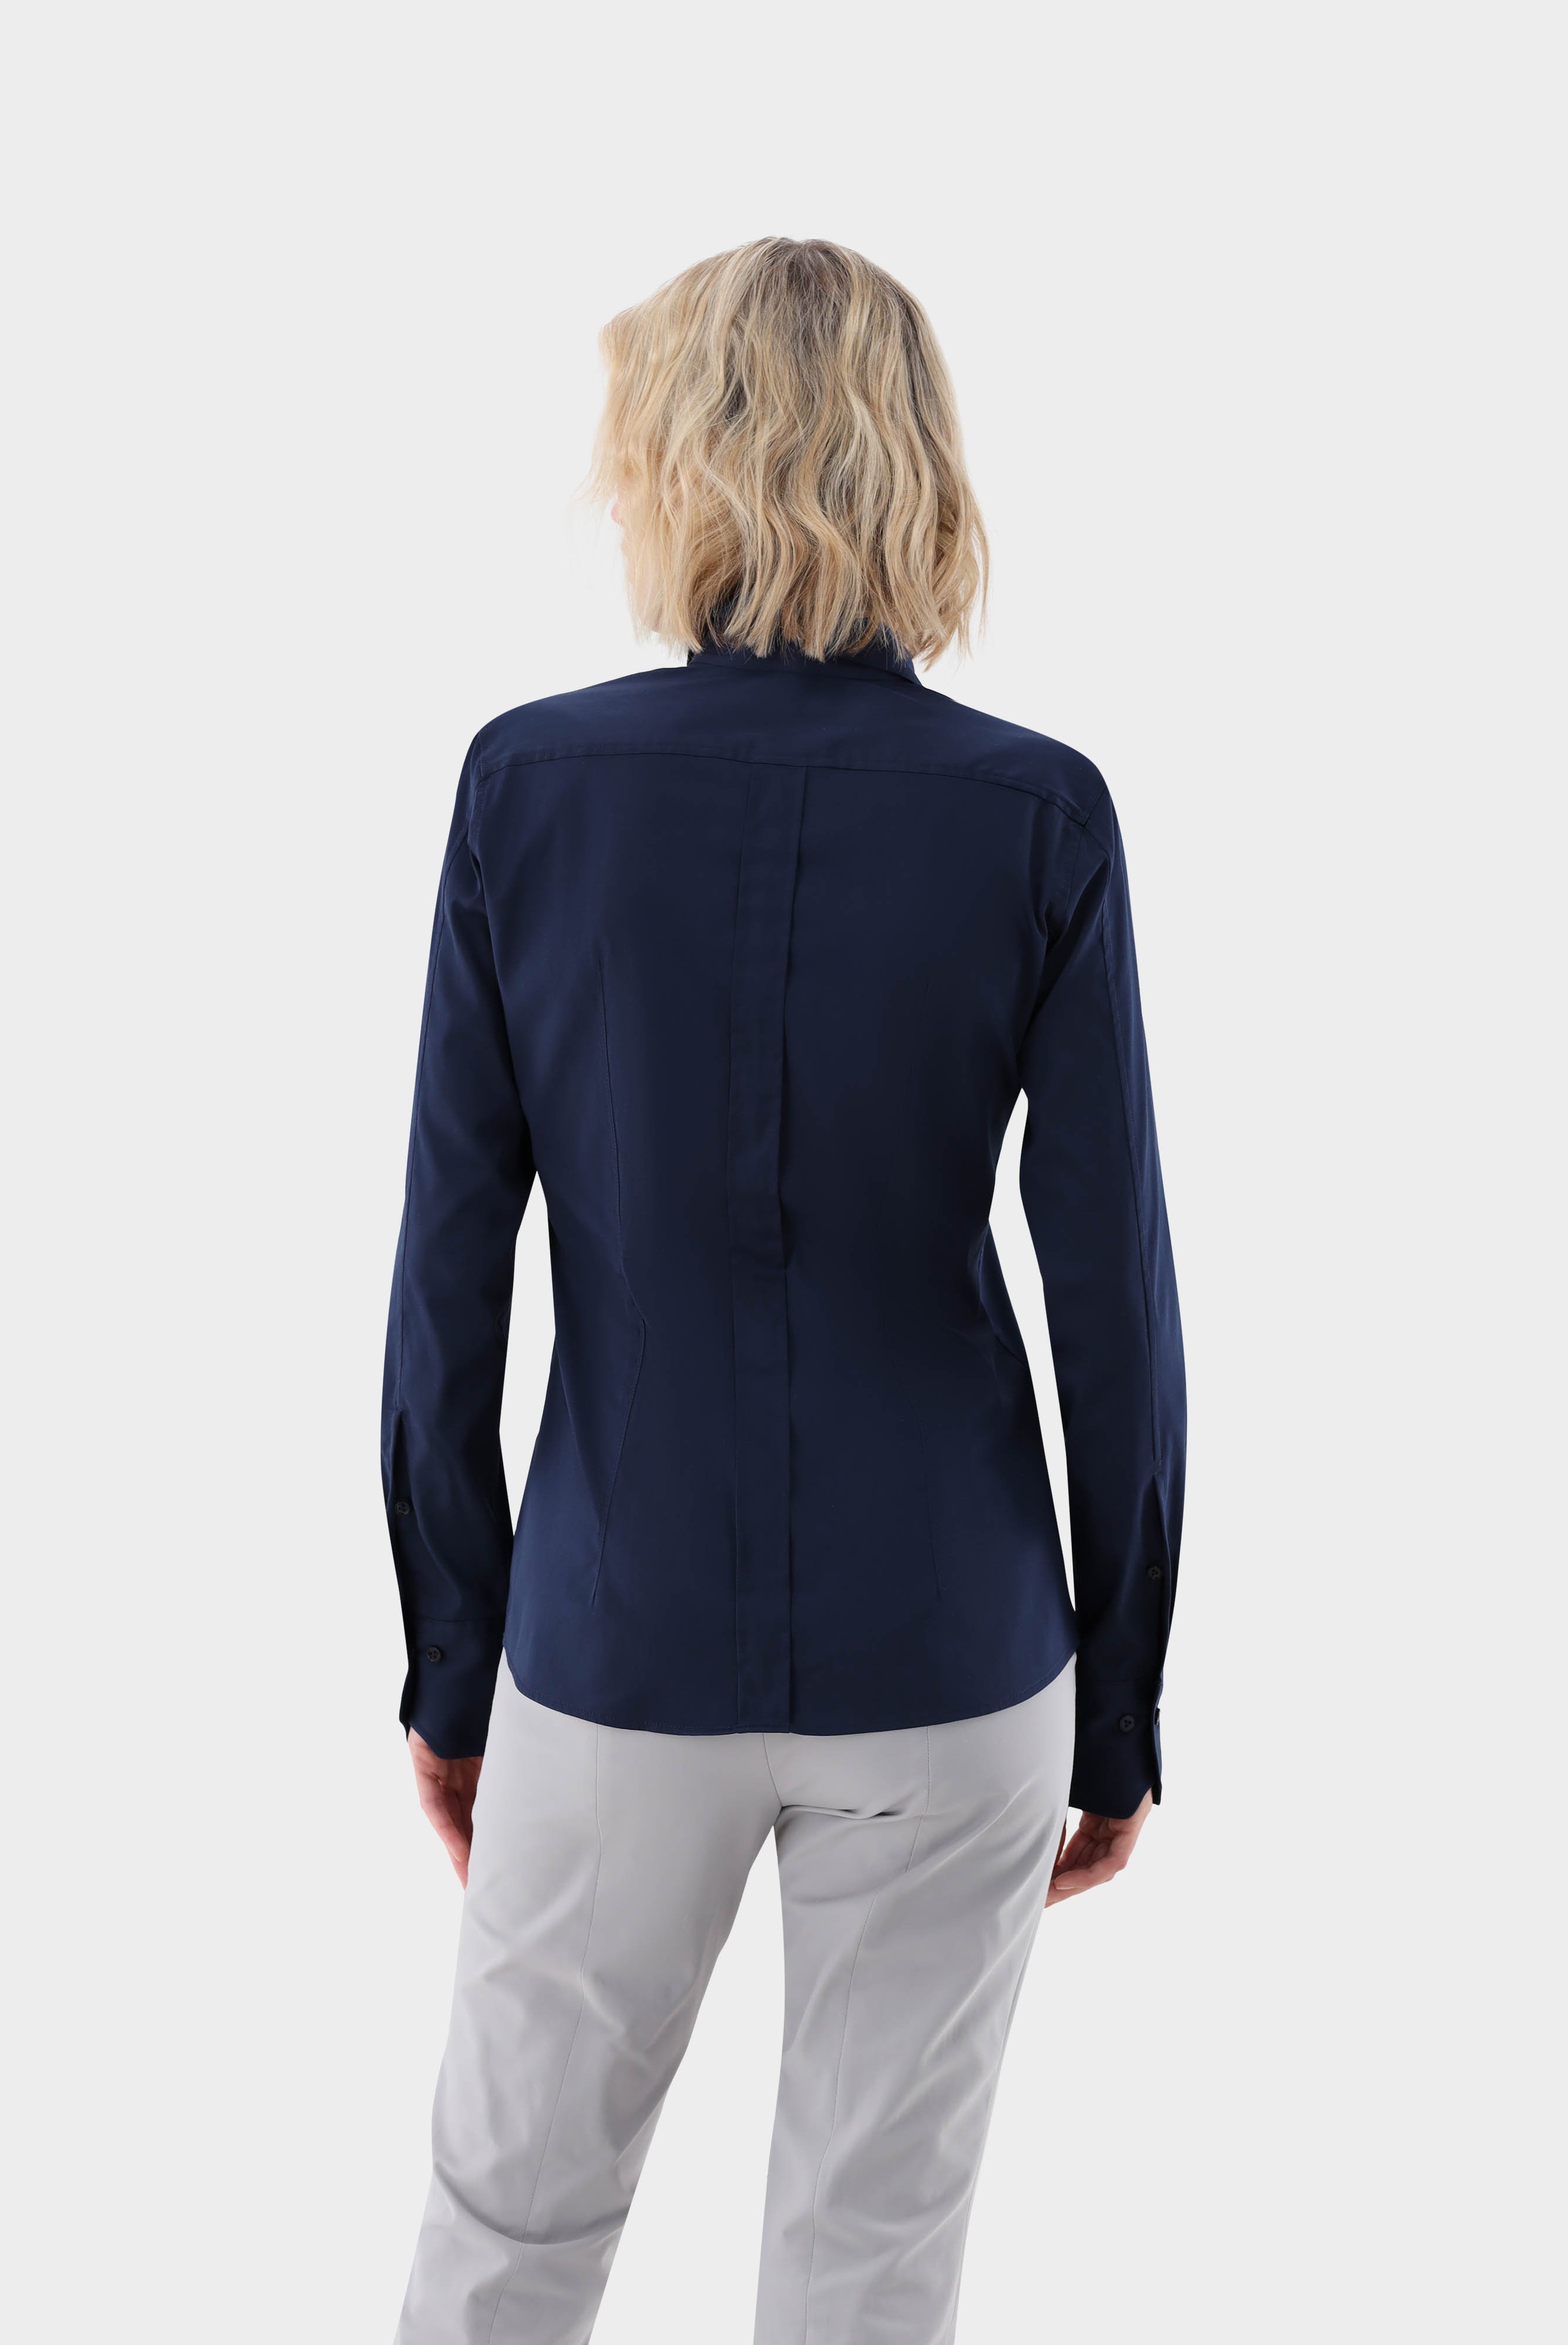 Business Blouses+Shirt Blouse with Stretch Slim Fit+05.5845.73.130830.780.32